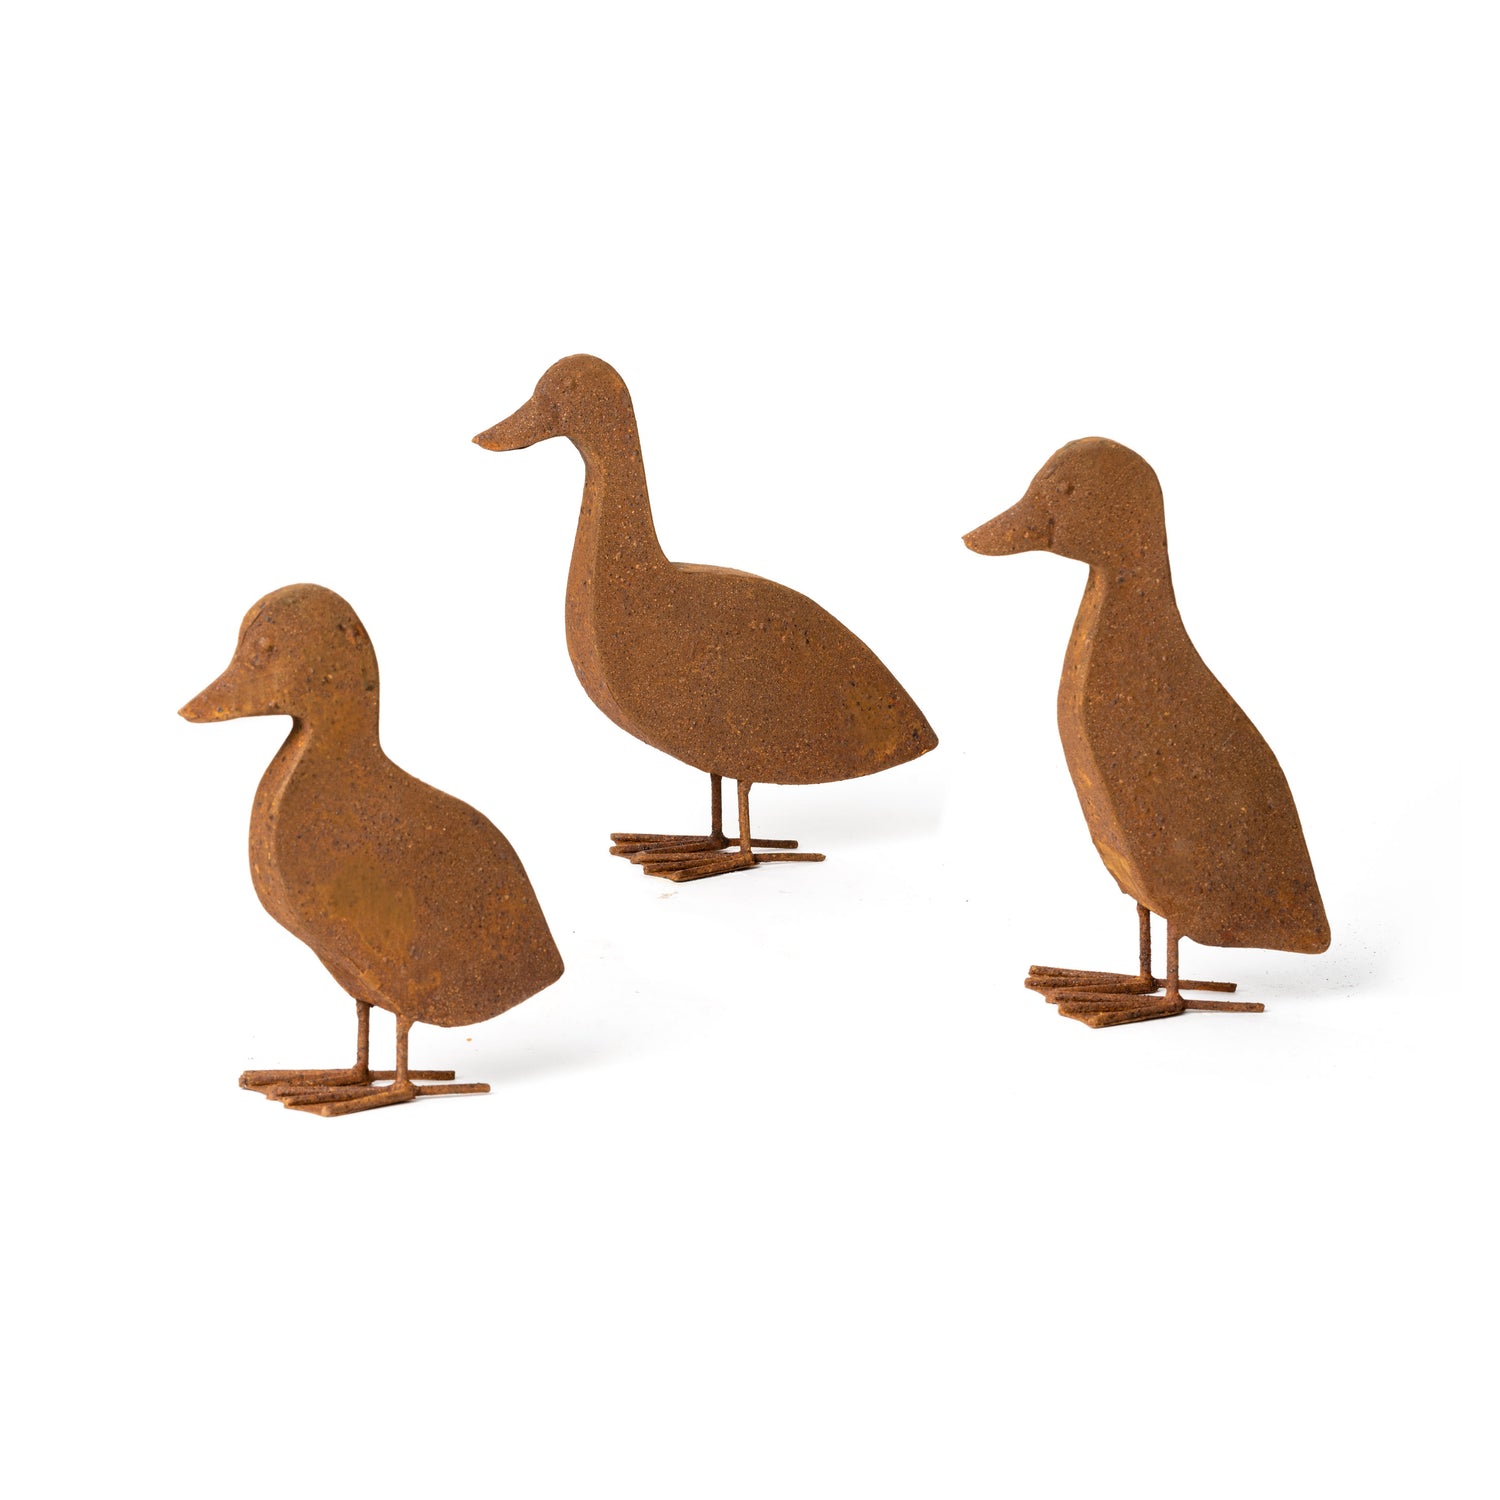 Ducklings Rust Component Set of 3